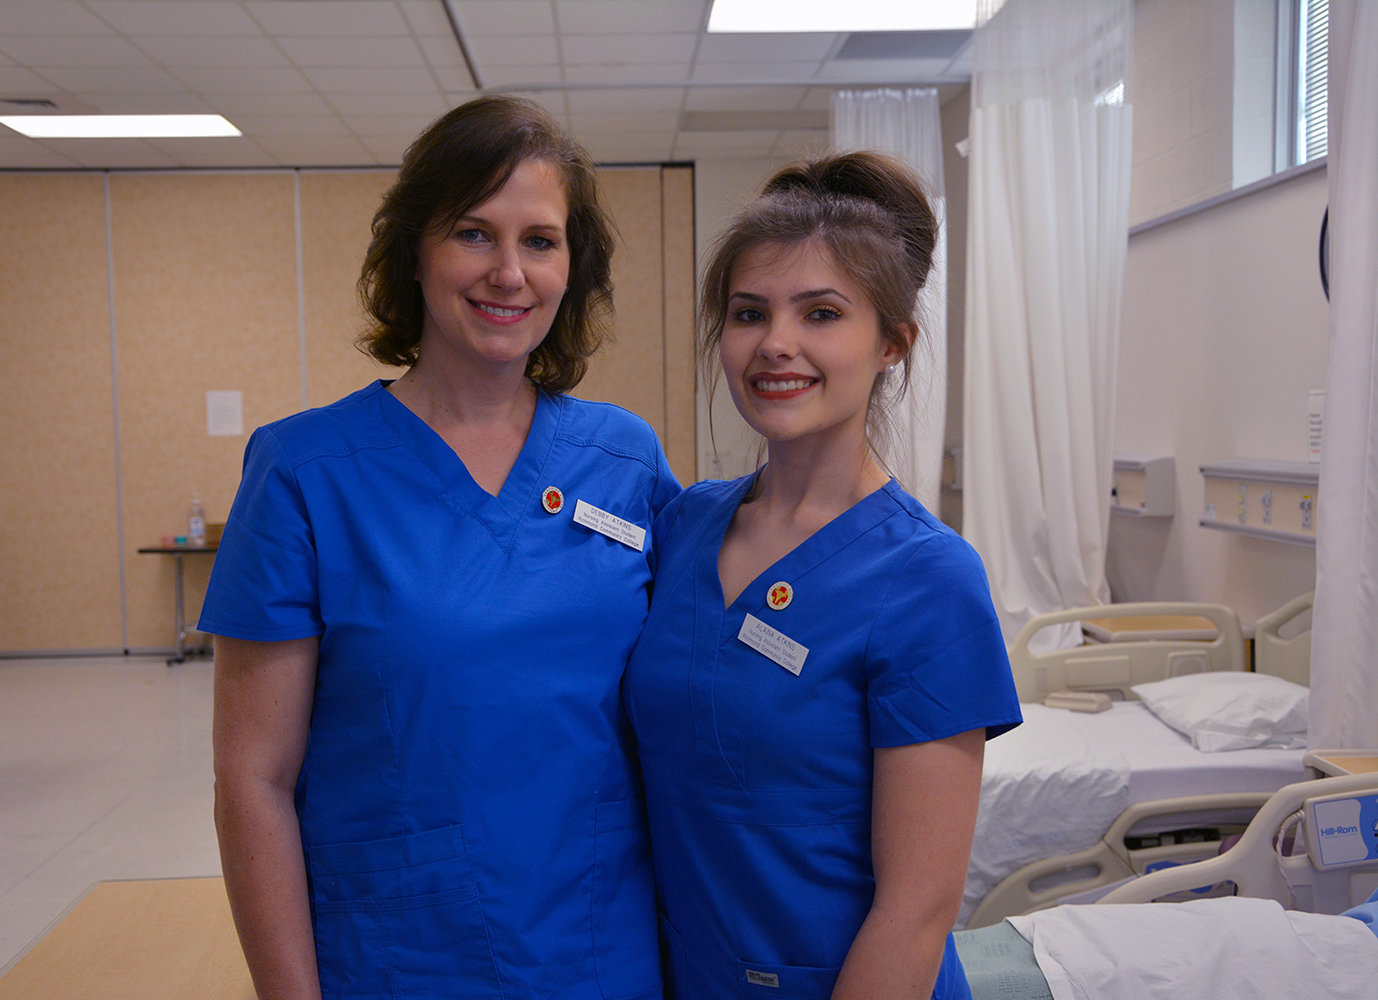 Debby Atkins and her daughter Alaina stand together in the nursing lab.